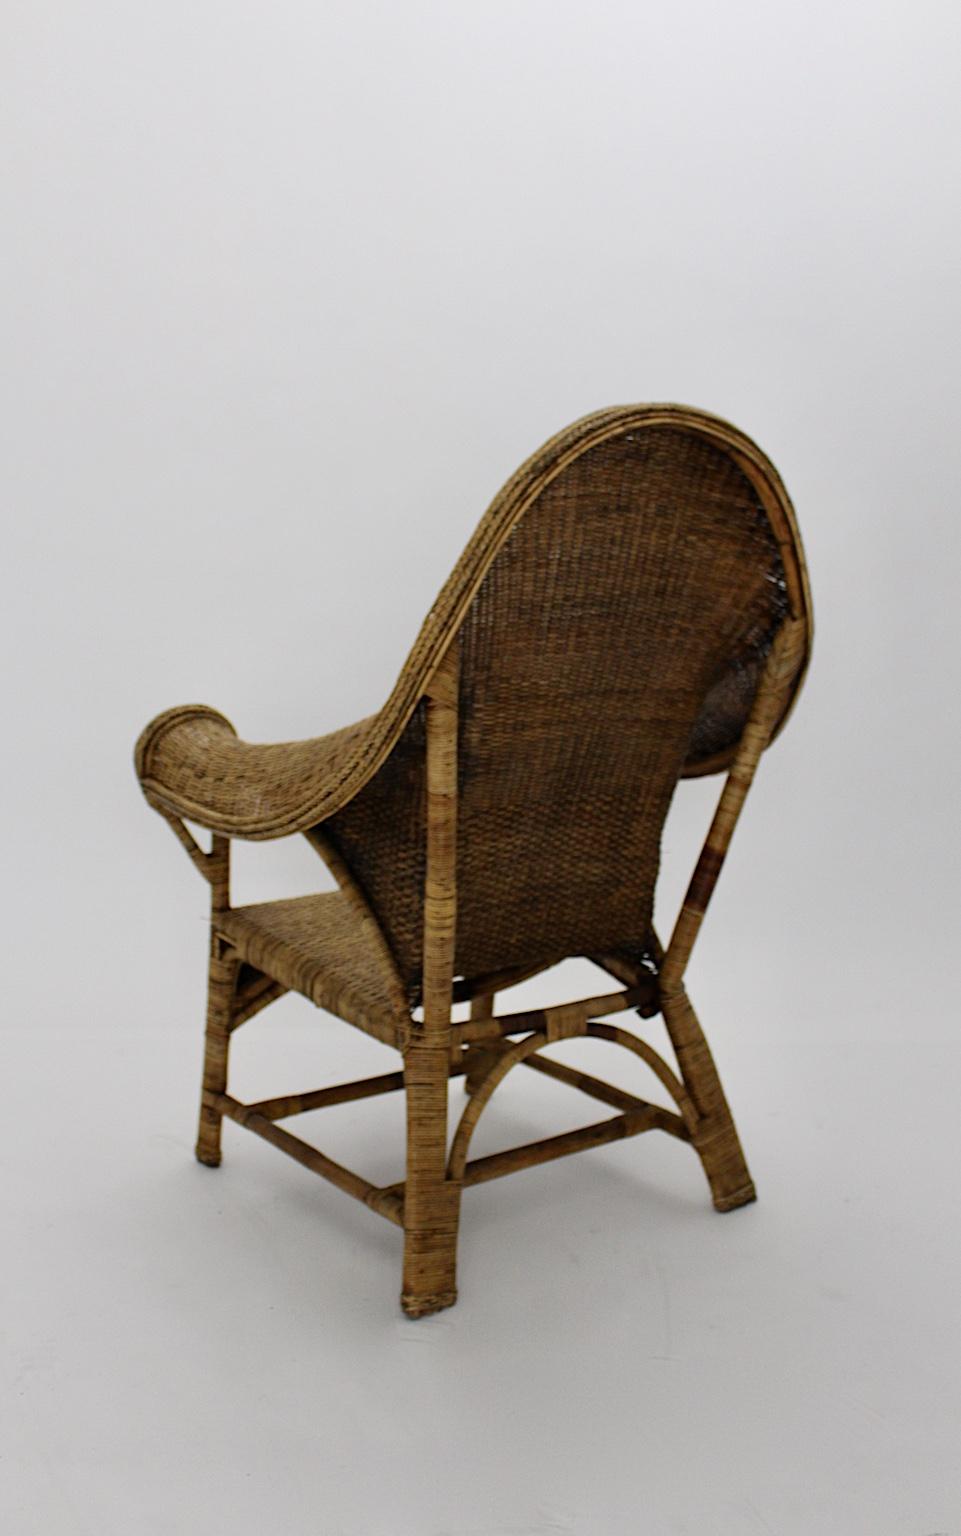 Organic Arts & Crafts Vintage Wicker Rattan Armchair Dryad and Co circa 1910 UK For Sale 5